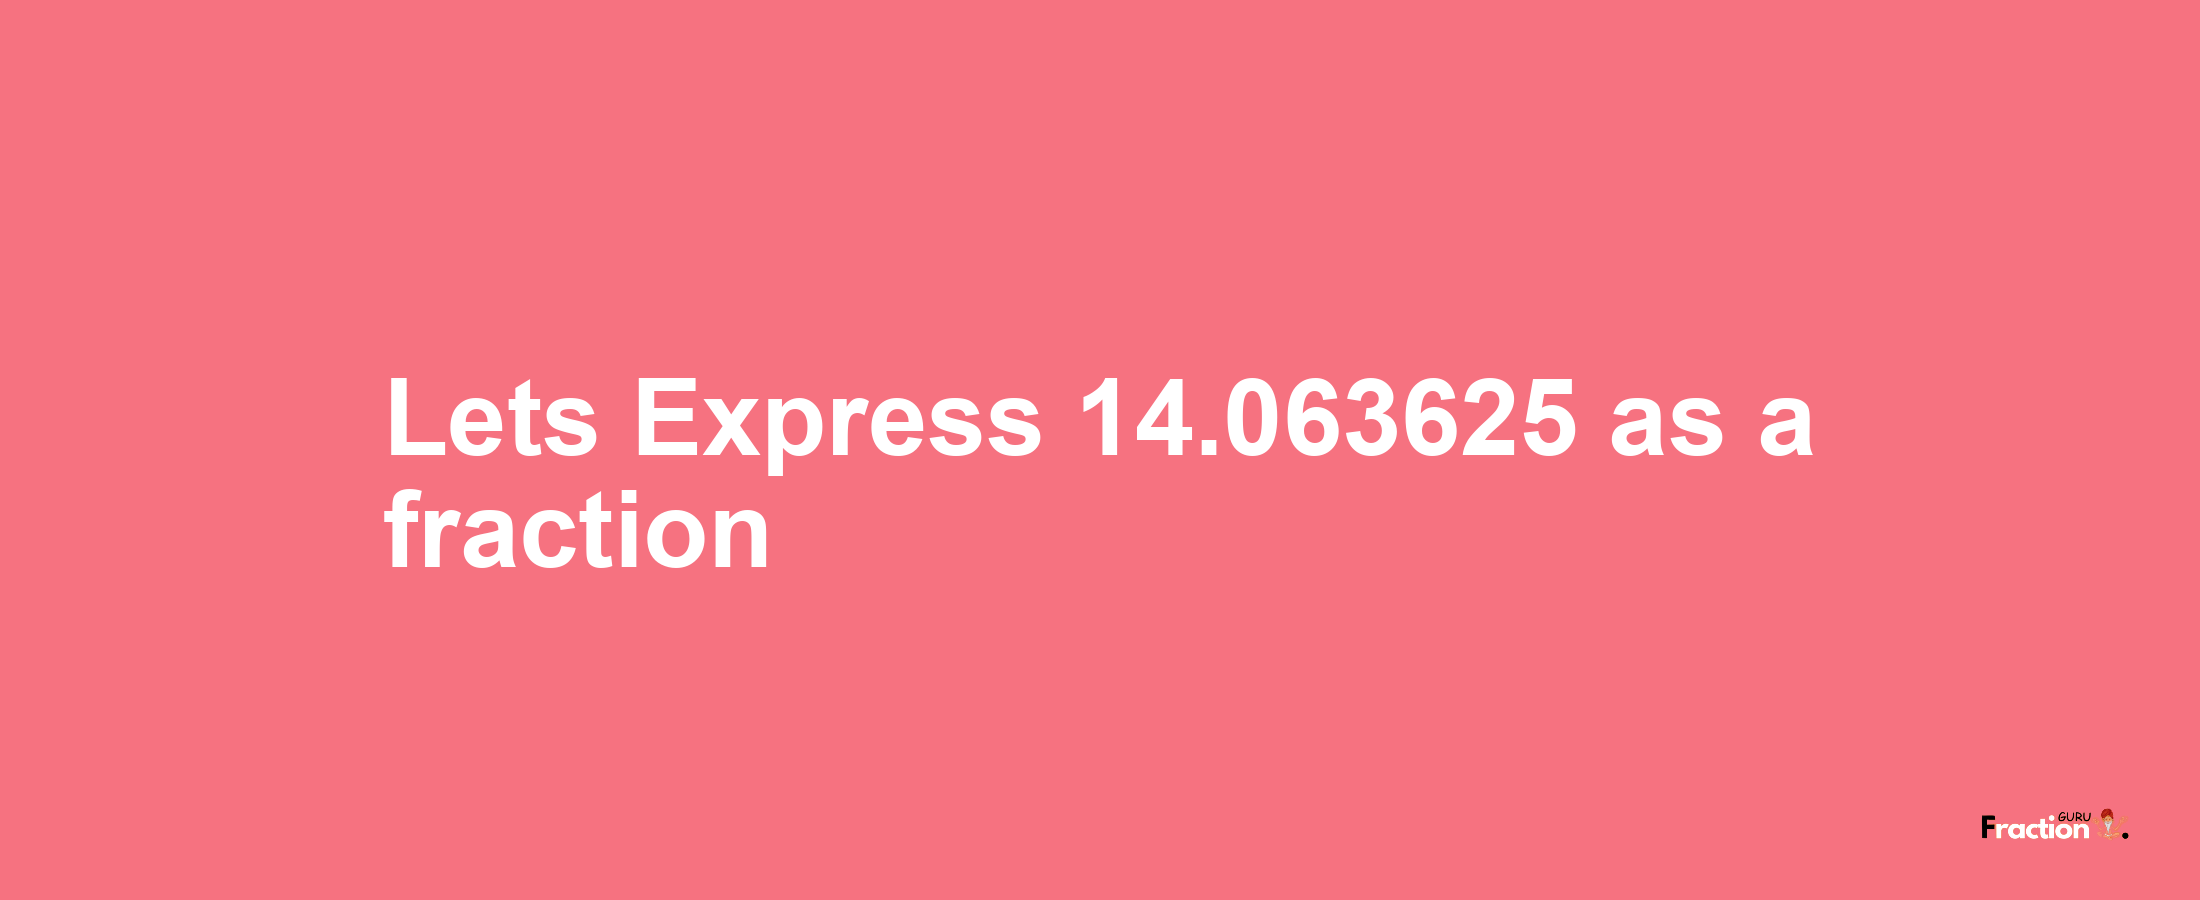 Lets Express 14.063625 as afraction